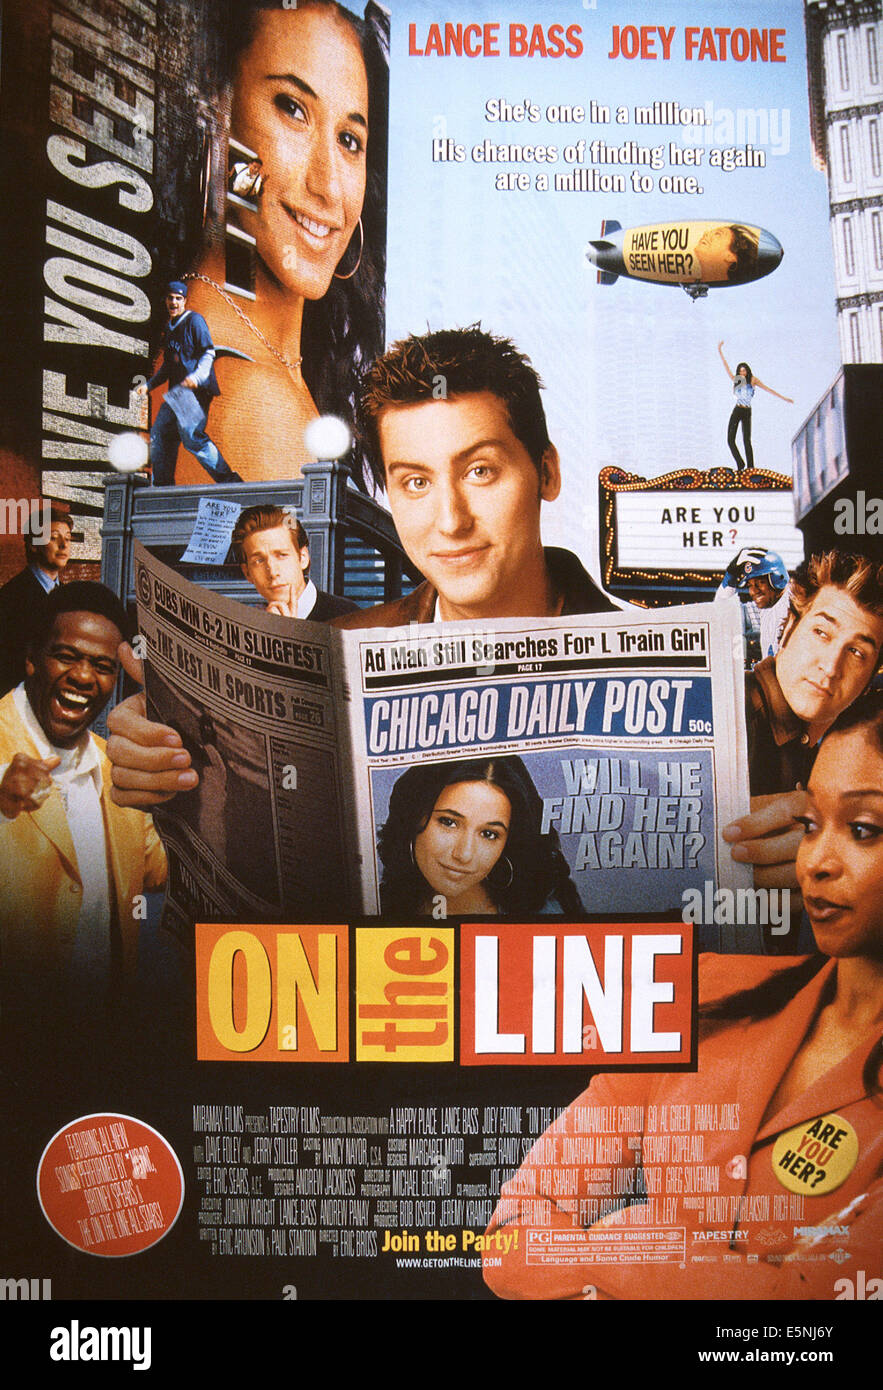 ON THE LINE, US poster, Emmanuelle Chriqui (top left), Al Green (bottom left), Lance Bass (center), Joey Fatone (second from Stock Photo